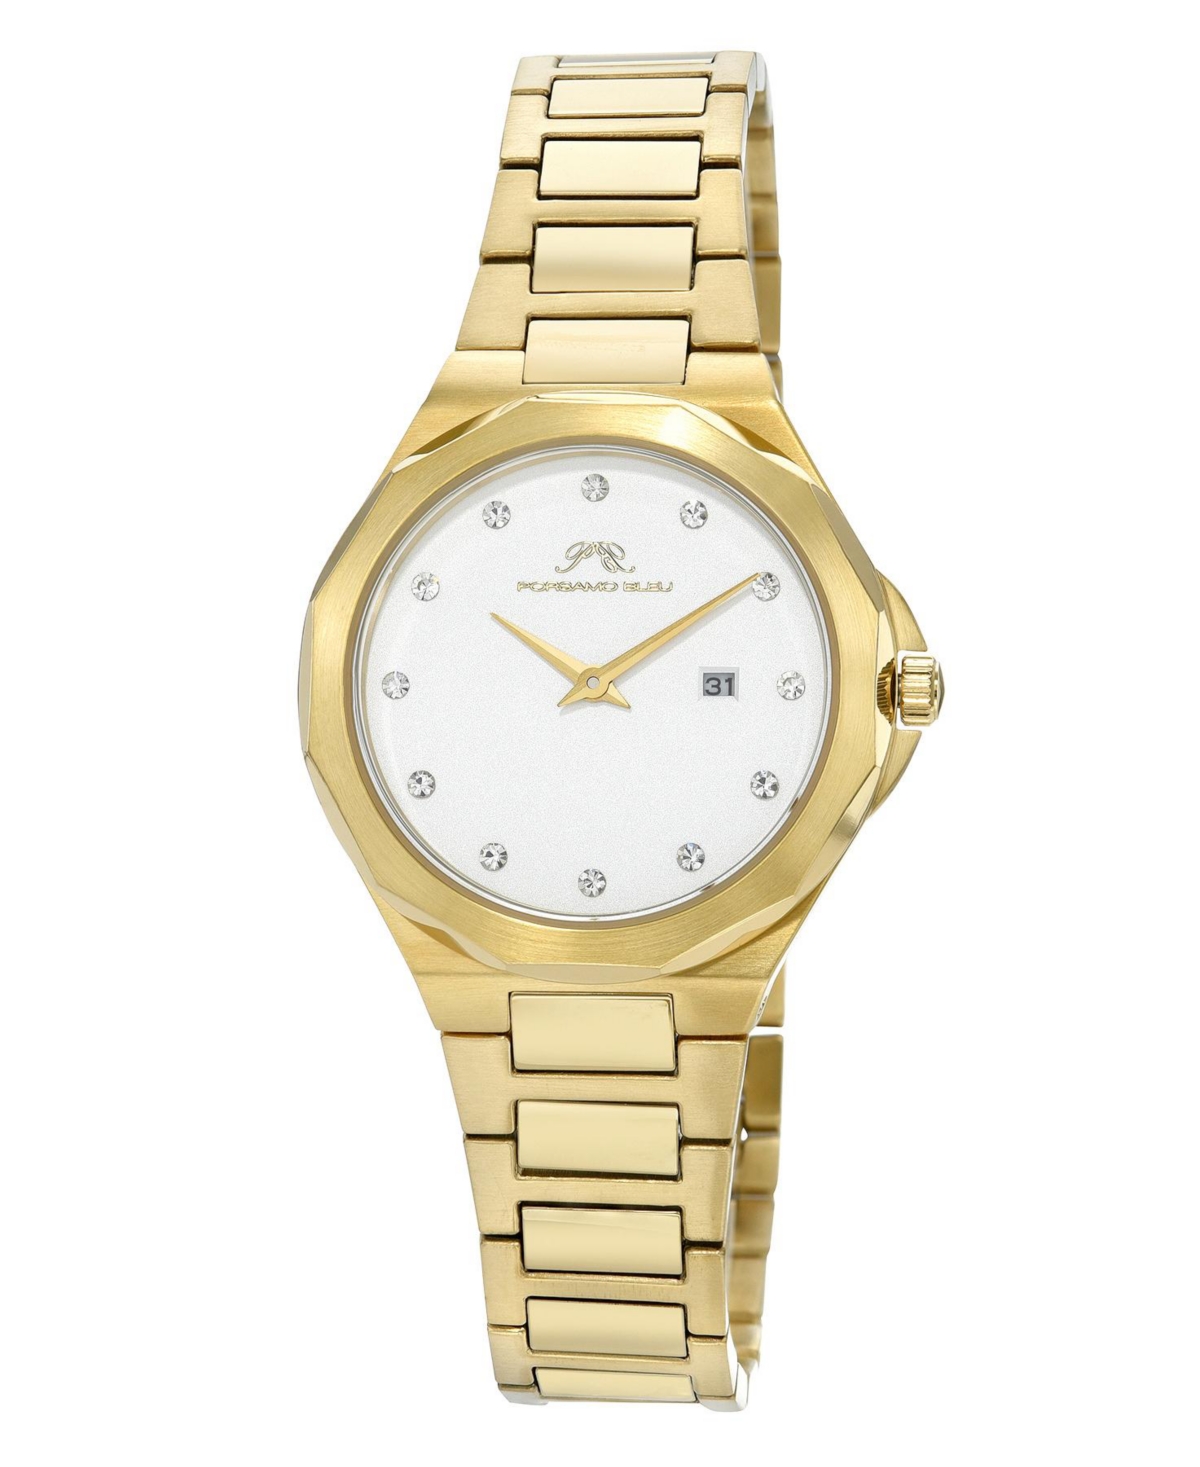 Victoria Stainless Steel Gold Tone & White Women's Watch 1242BVIS - Gold